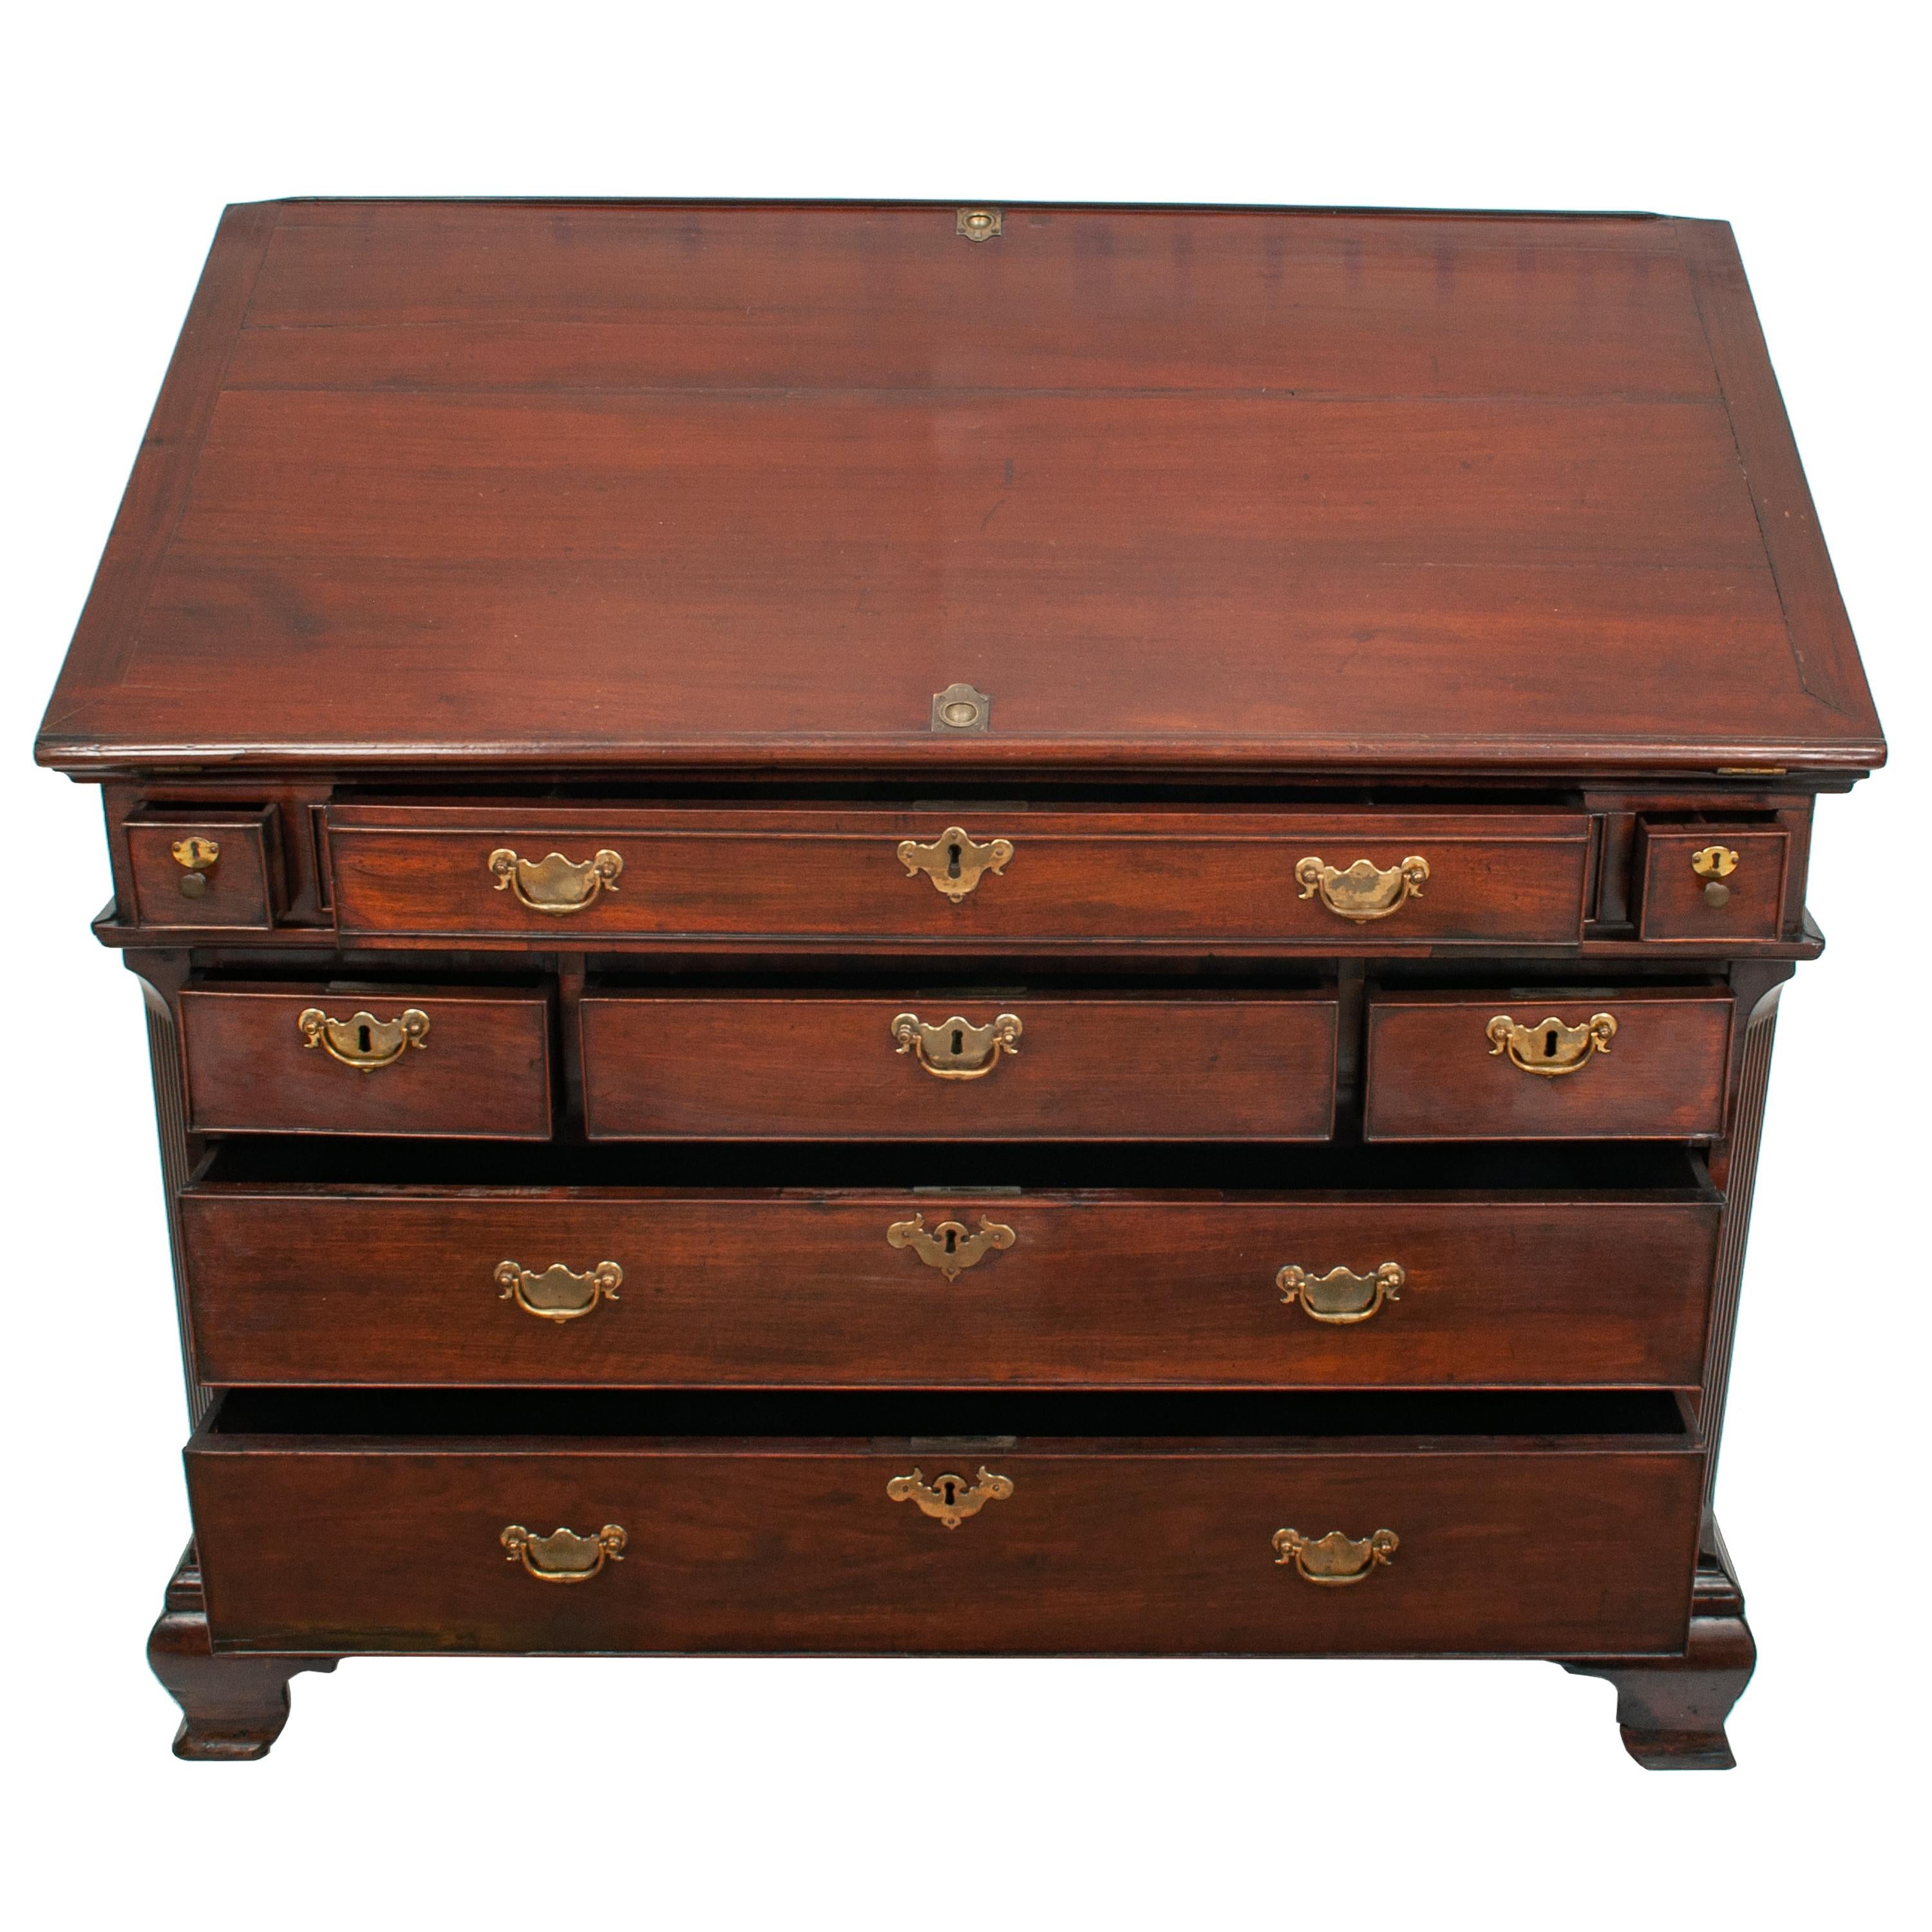 English Antique Mahogany Georgian Architect's Drafting Drawing Desk Table Chest 1780 For Sale